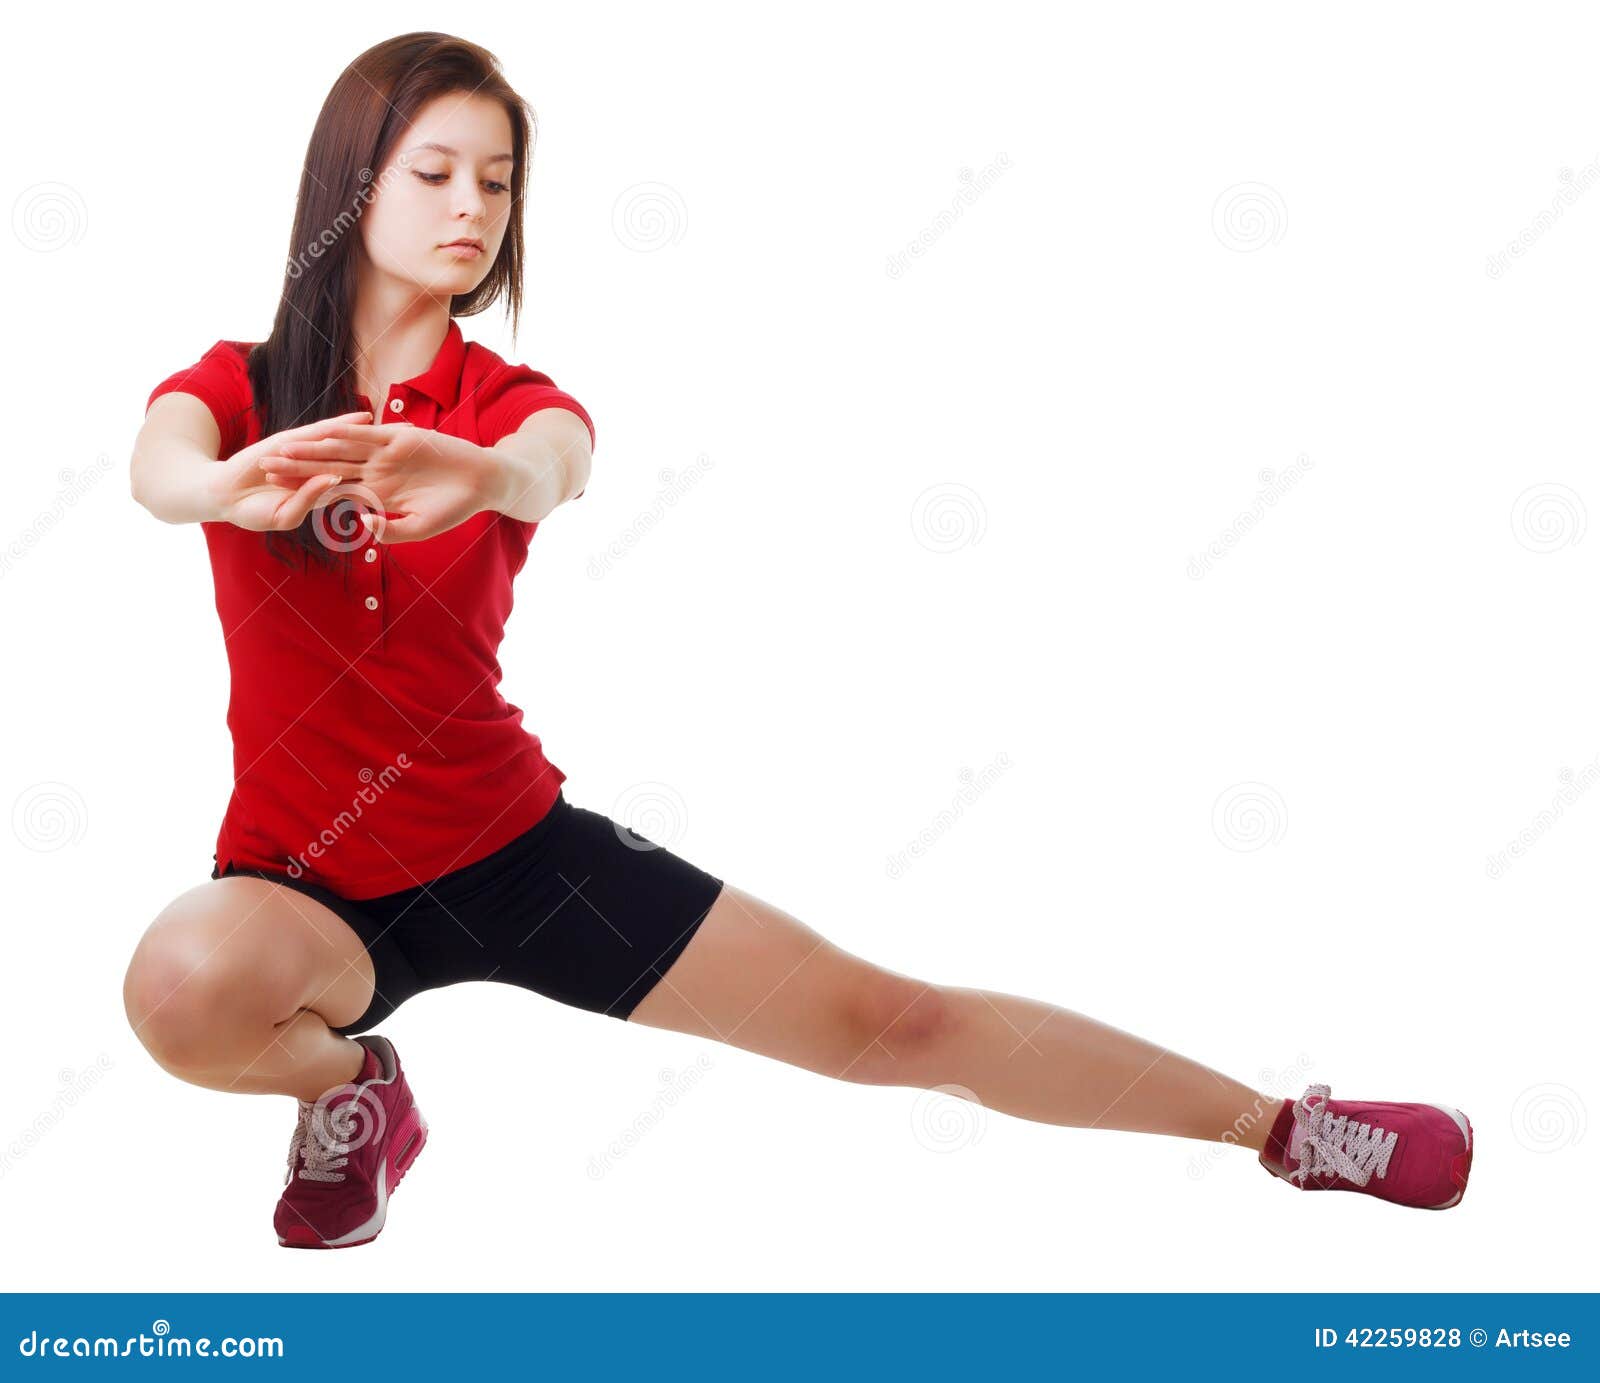 Young Girl in Short Shorts and a Sports Shirt Performs Squats. Isolated  Stock Photo - Image of caucasian, attractive: 42259828